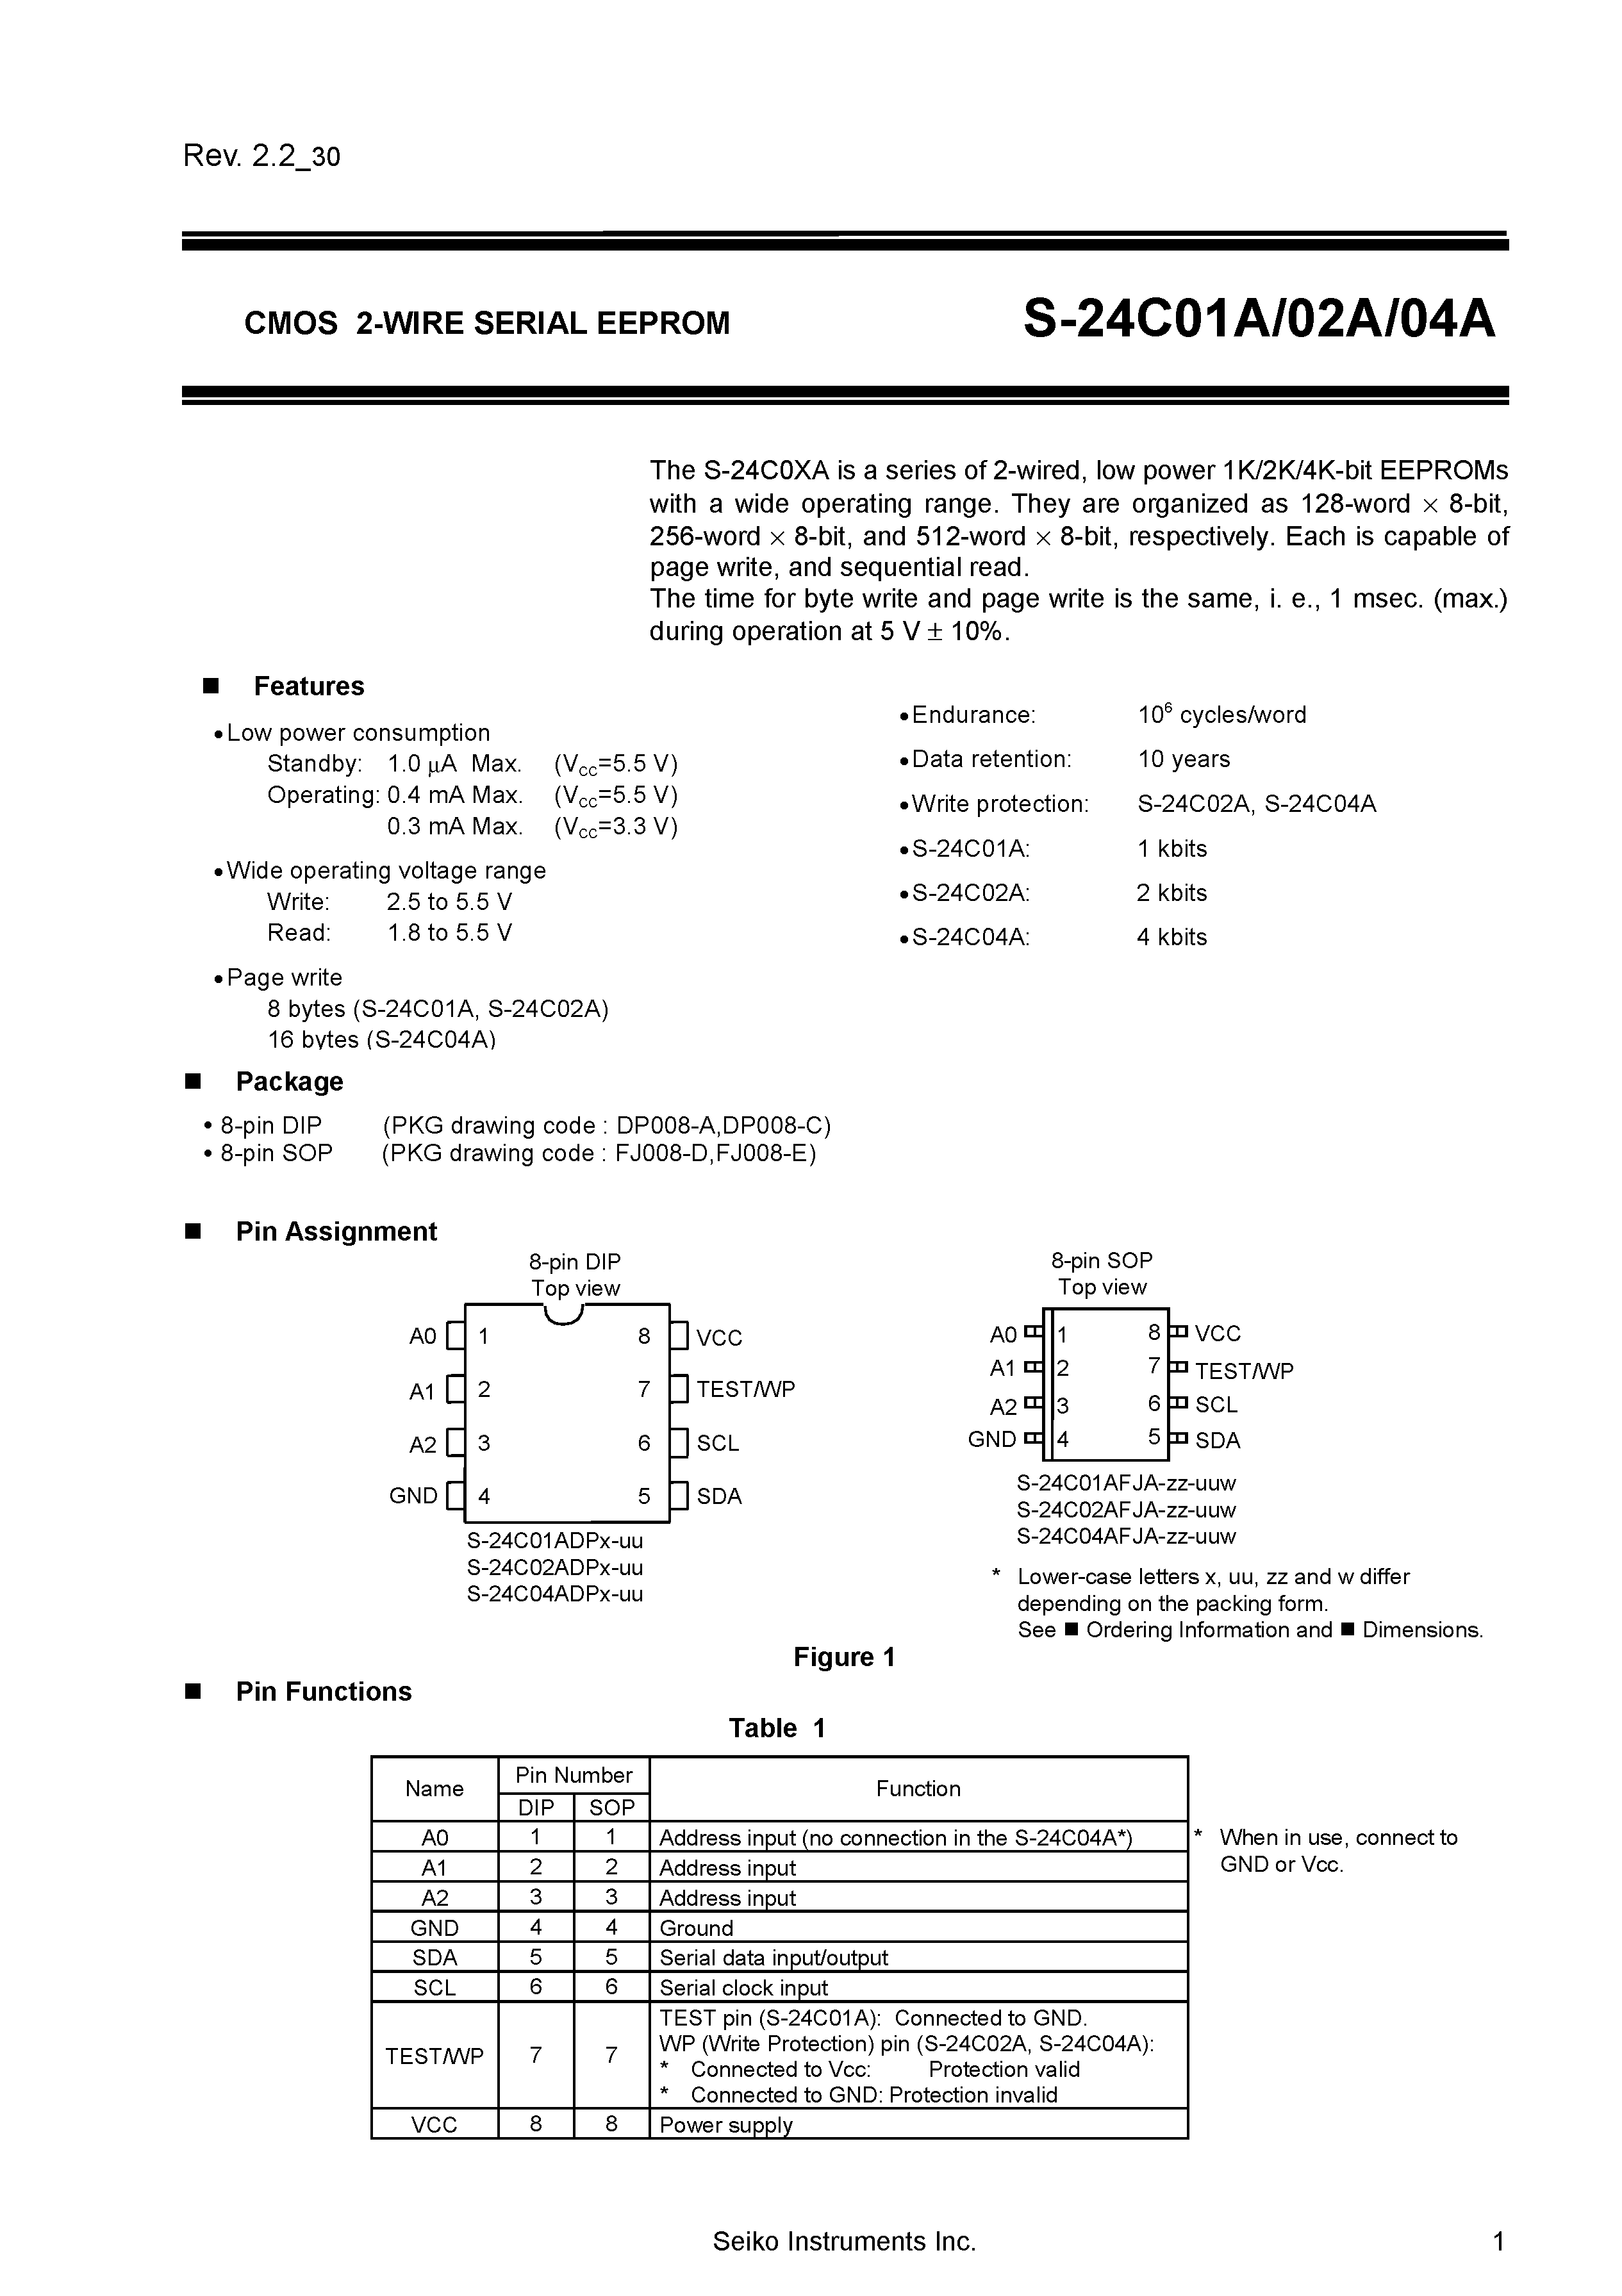 Datasheet S-24C04AFJA-TB11-S - CMOS 2-WIRE SERIAL EEPROM page 1